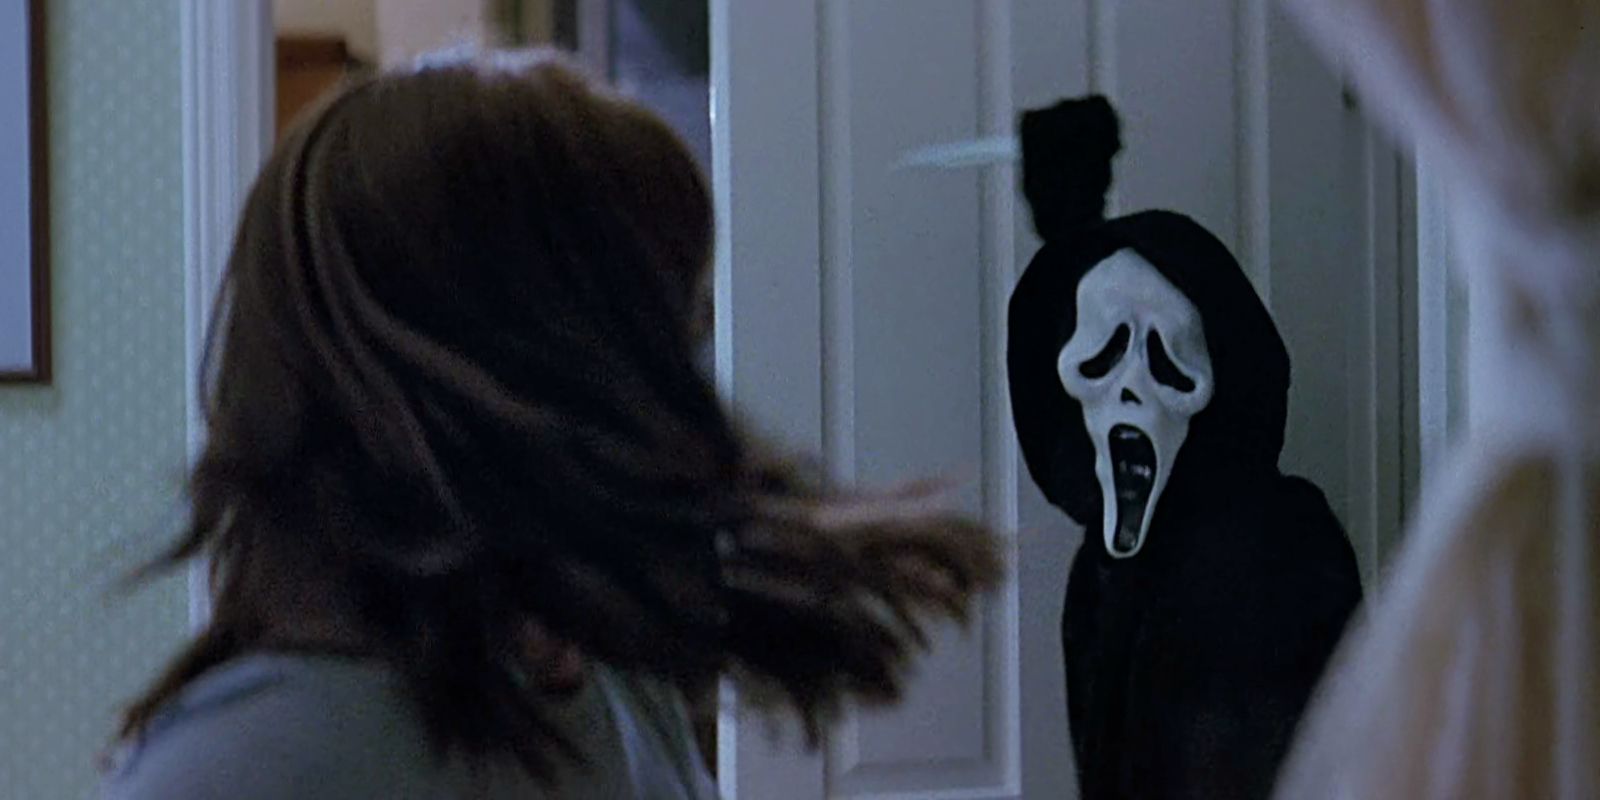 Sydney turns around and sees Ghostface with a knife in Scream.